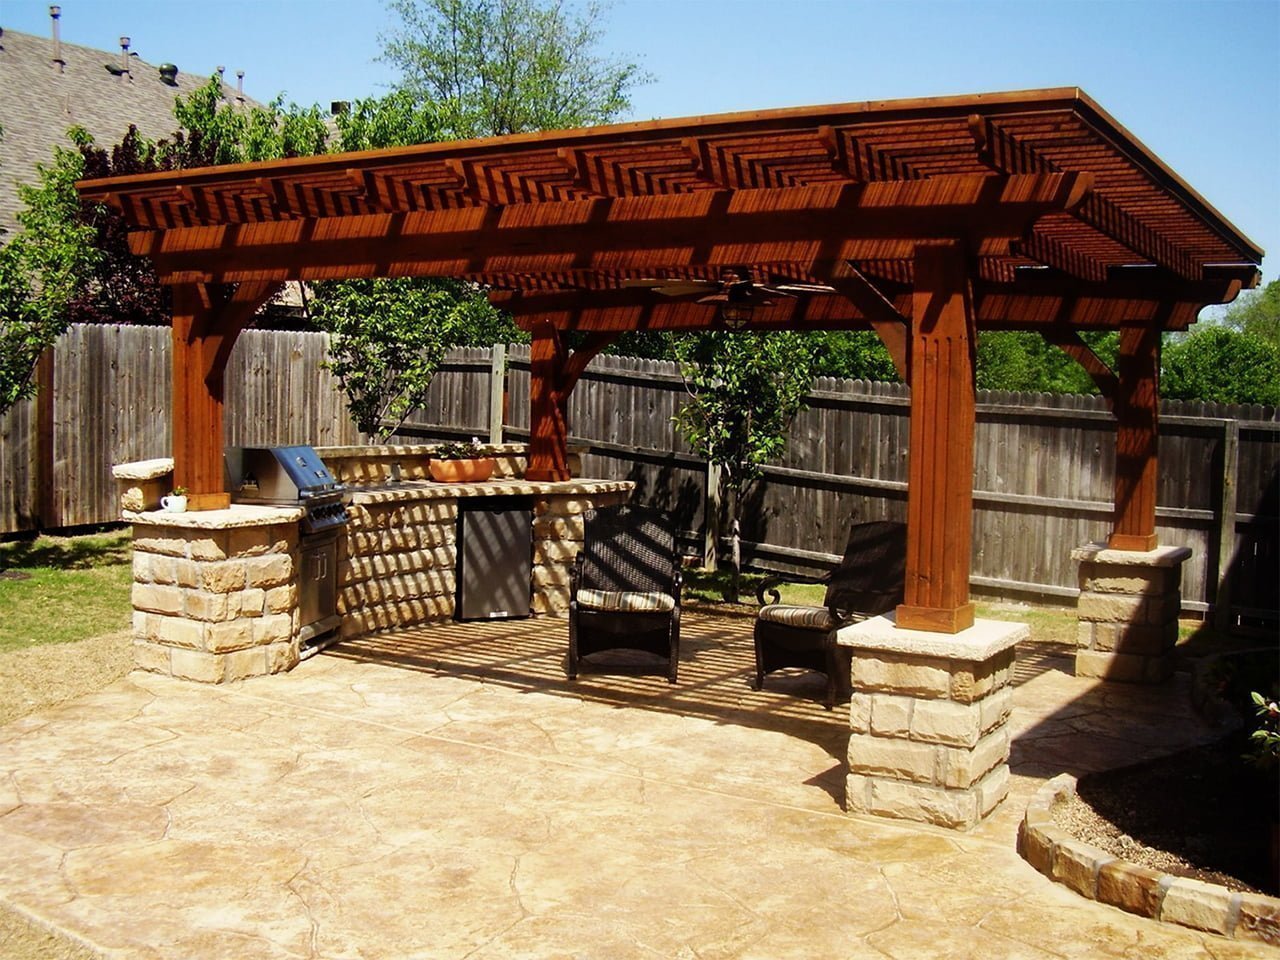 Patterned Mounted Gazebo With Simple Seating